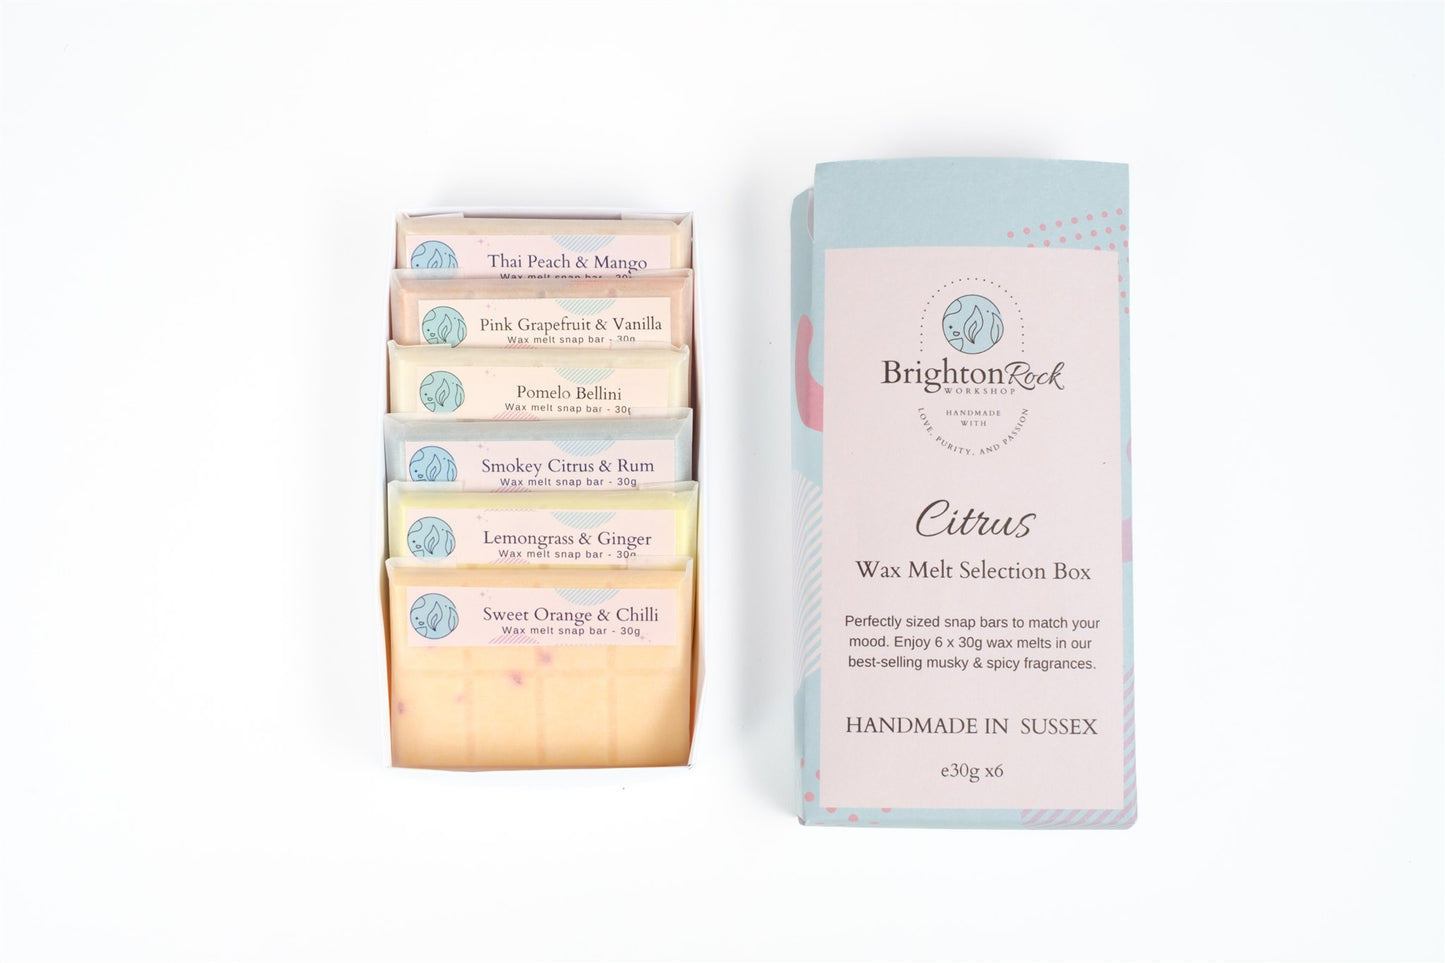 citrus wax melt selection box. 6 x 30g bars of luxury and high quality citrussy scents in plant based wax. vegan and handmade in the UK. Brighton Rock Workshop